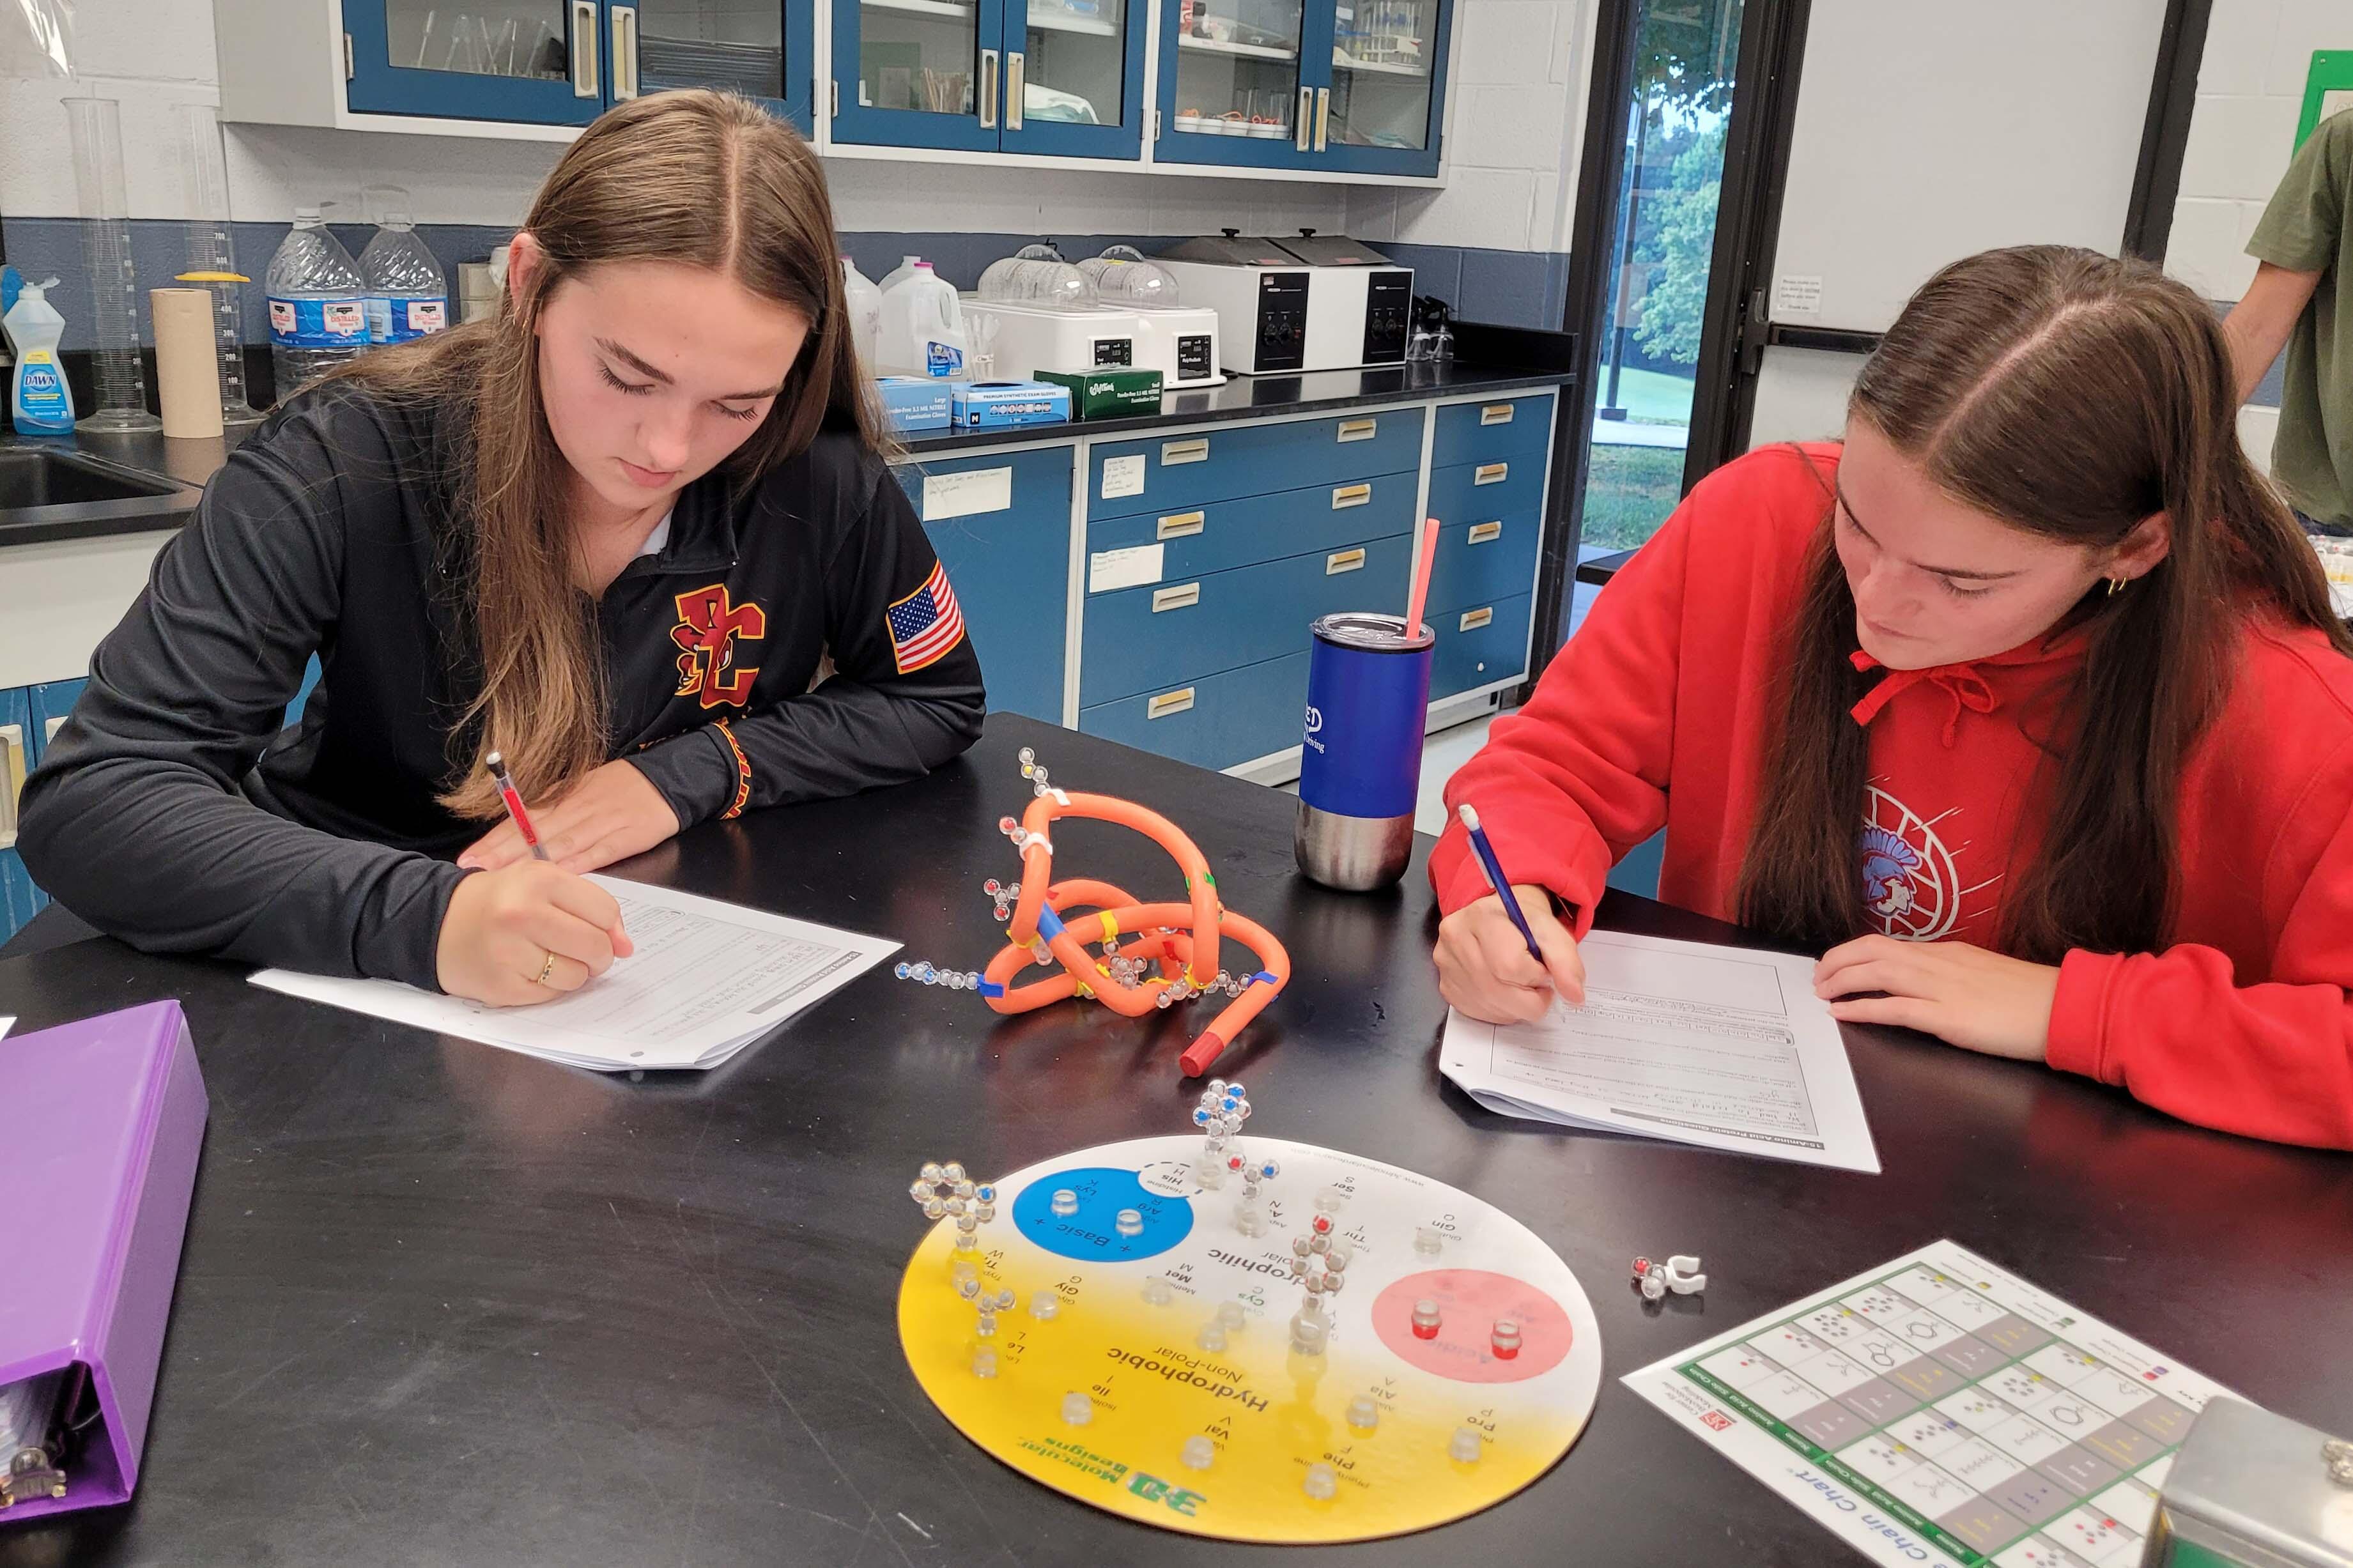 Students in College Biology compare structure and polarity of amino acids common in human proteins